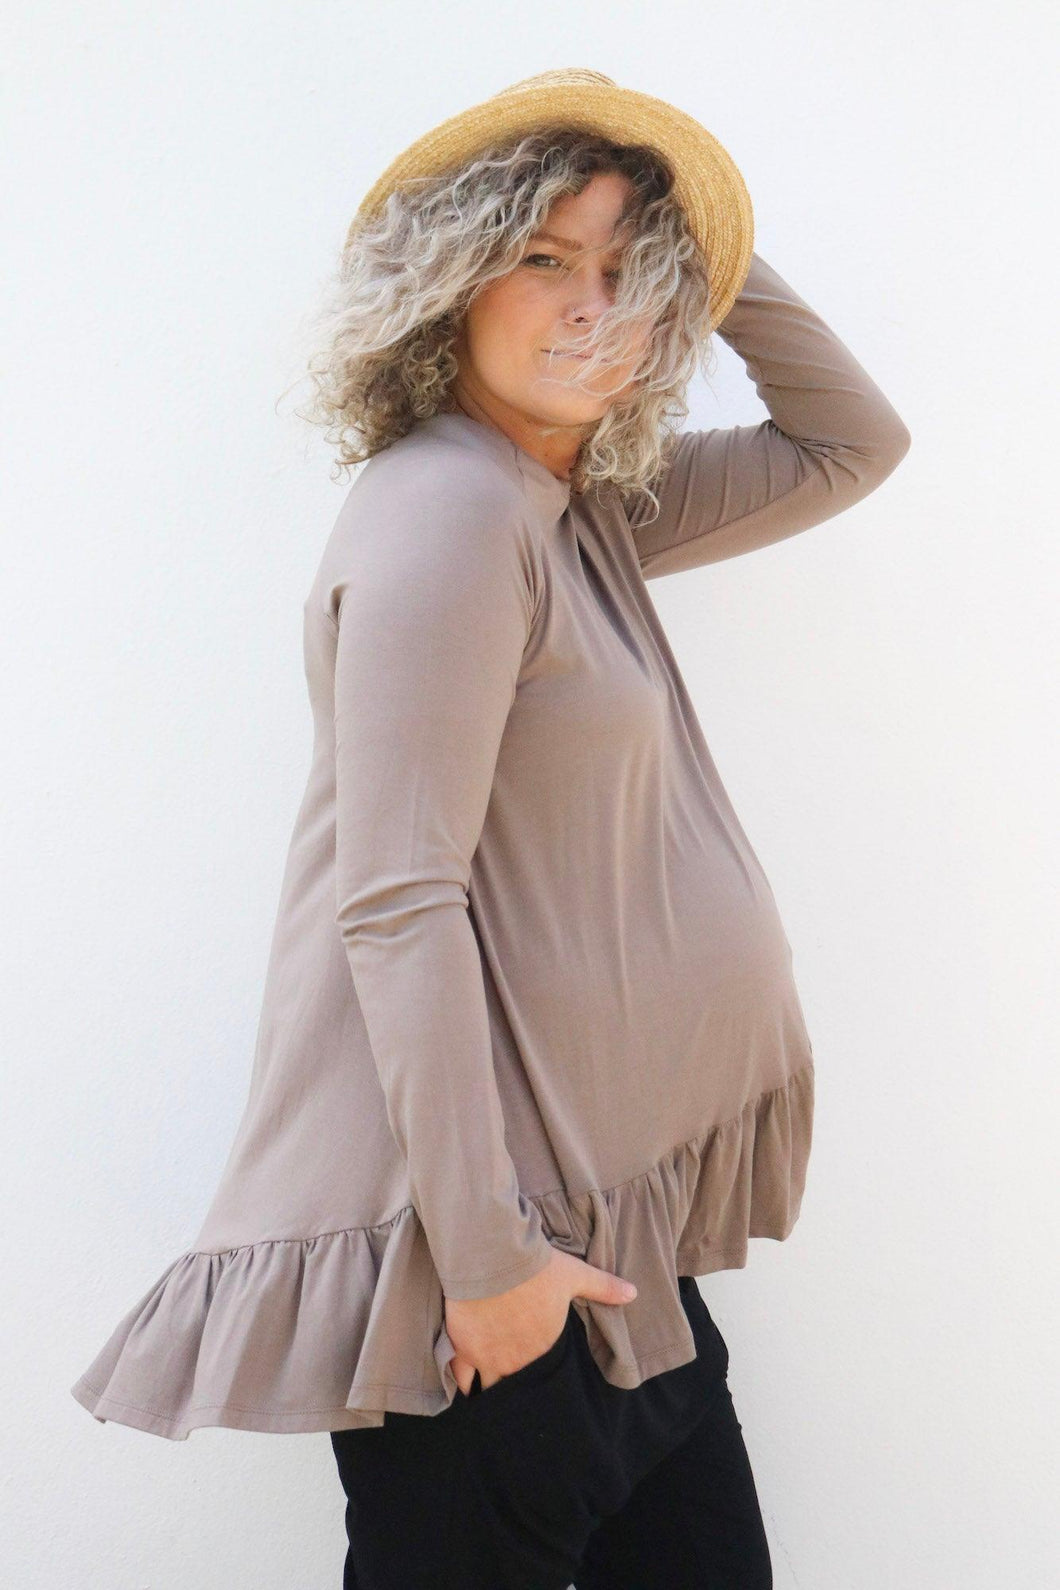 Pregnant mum standing side on wearing a hat and brown long sleeve top with her hand in her pocket